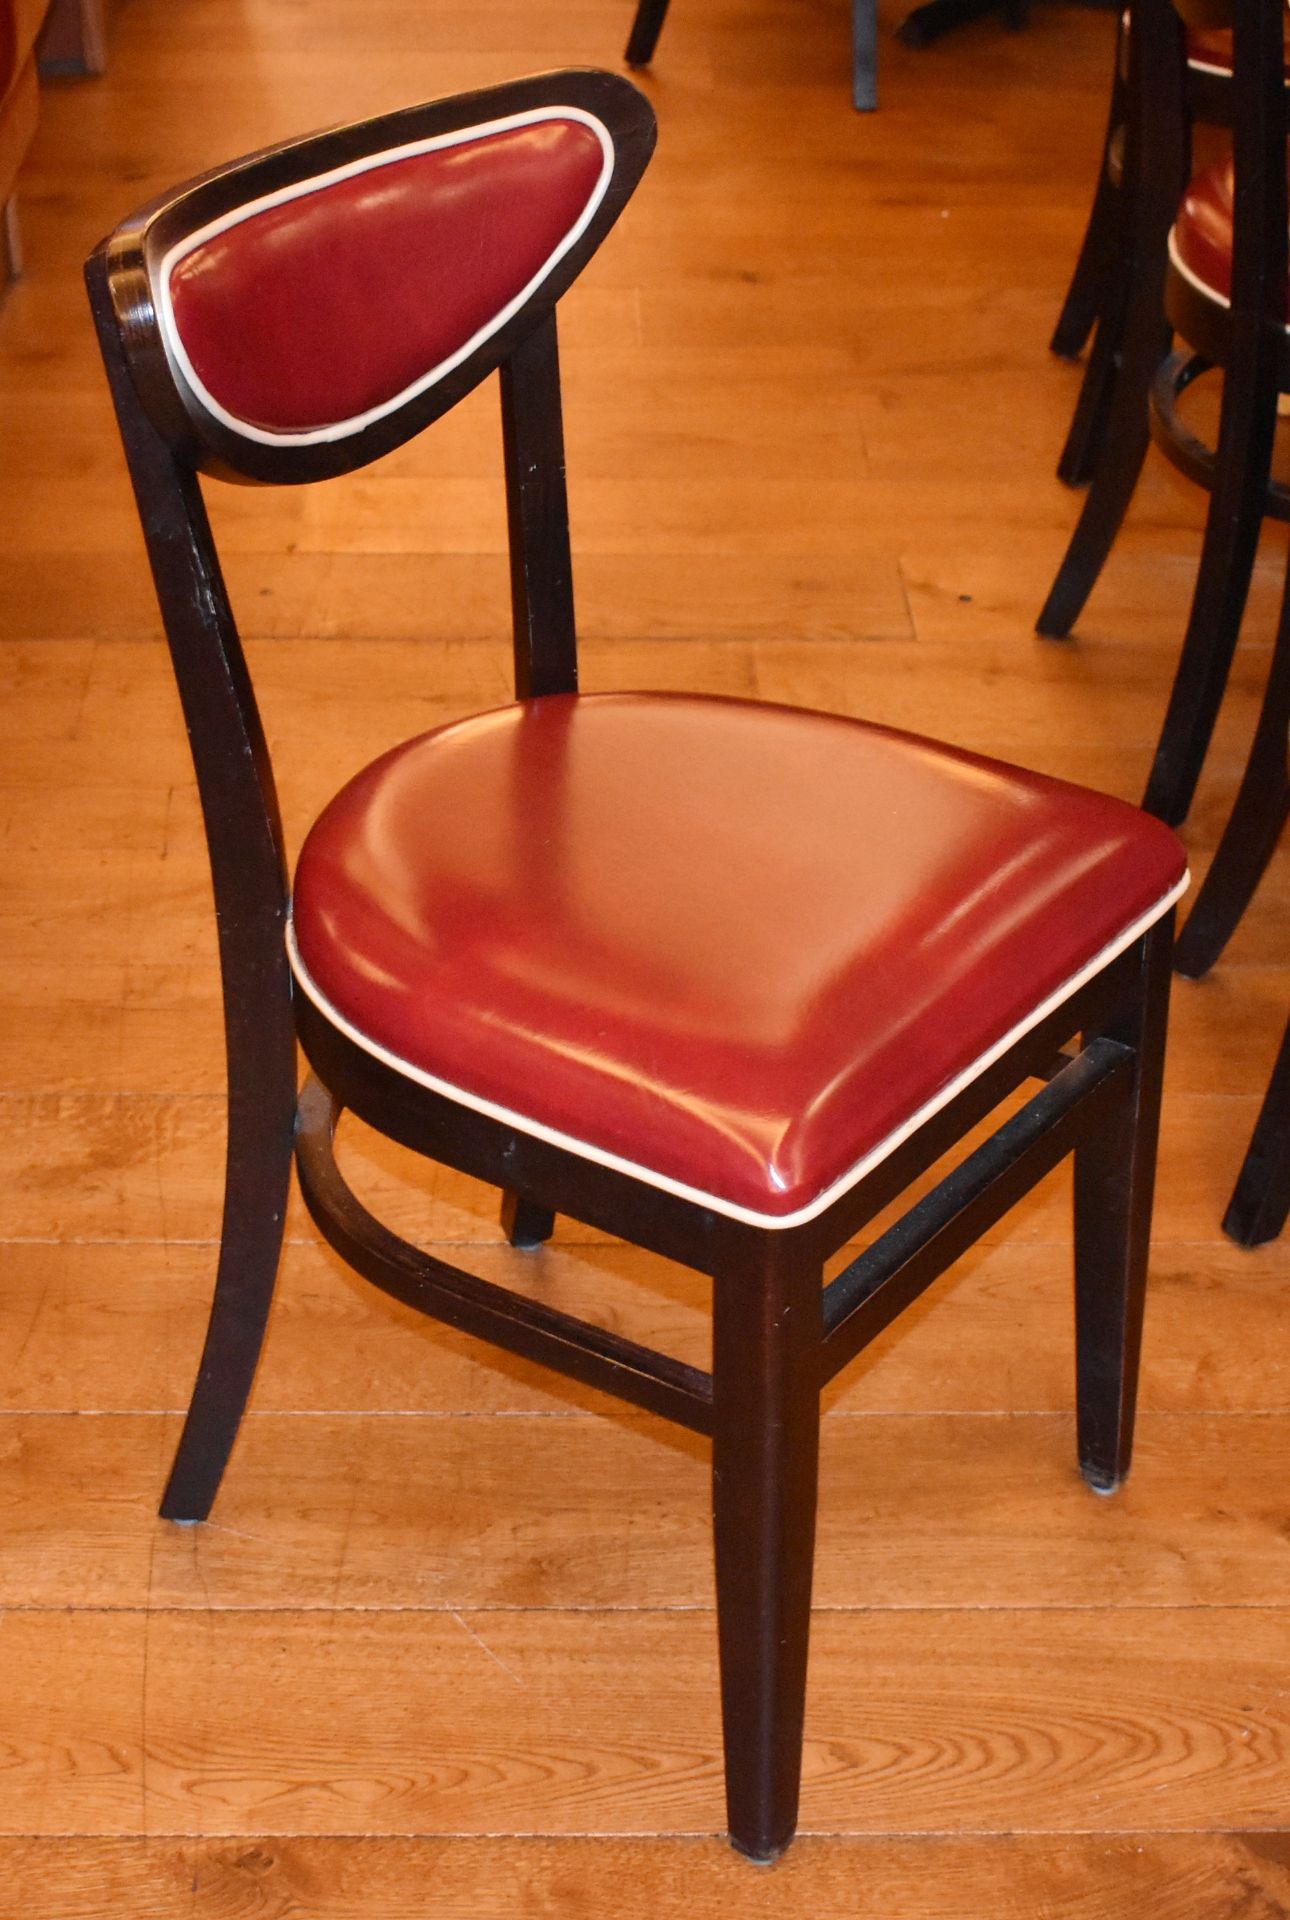 8 x American Diner Restaurant Chairs - Features Red Faux Leather Upholstery and White Piping - - Image 2 of 3